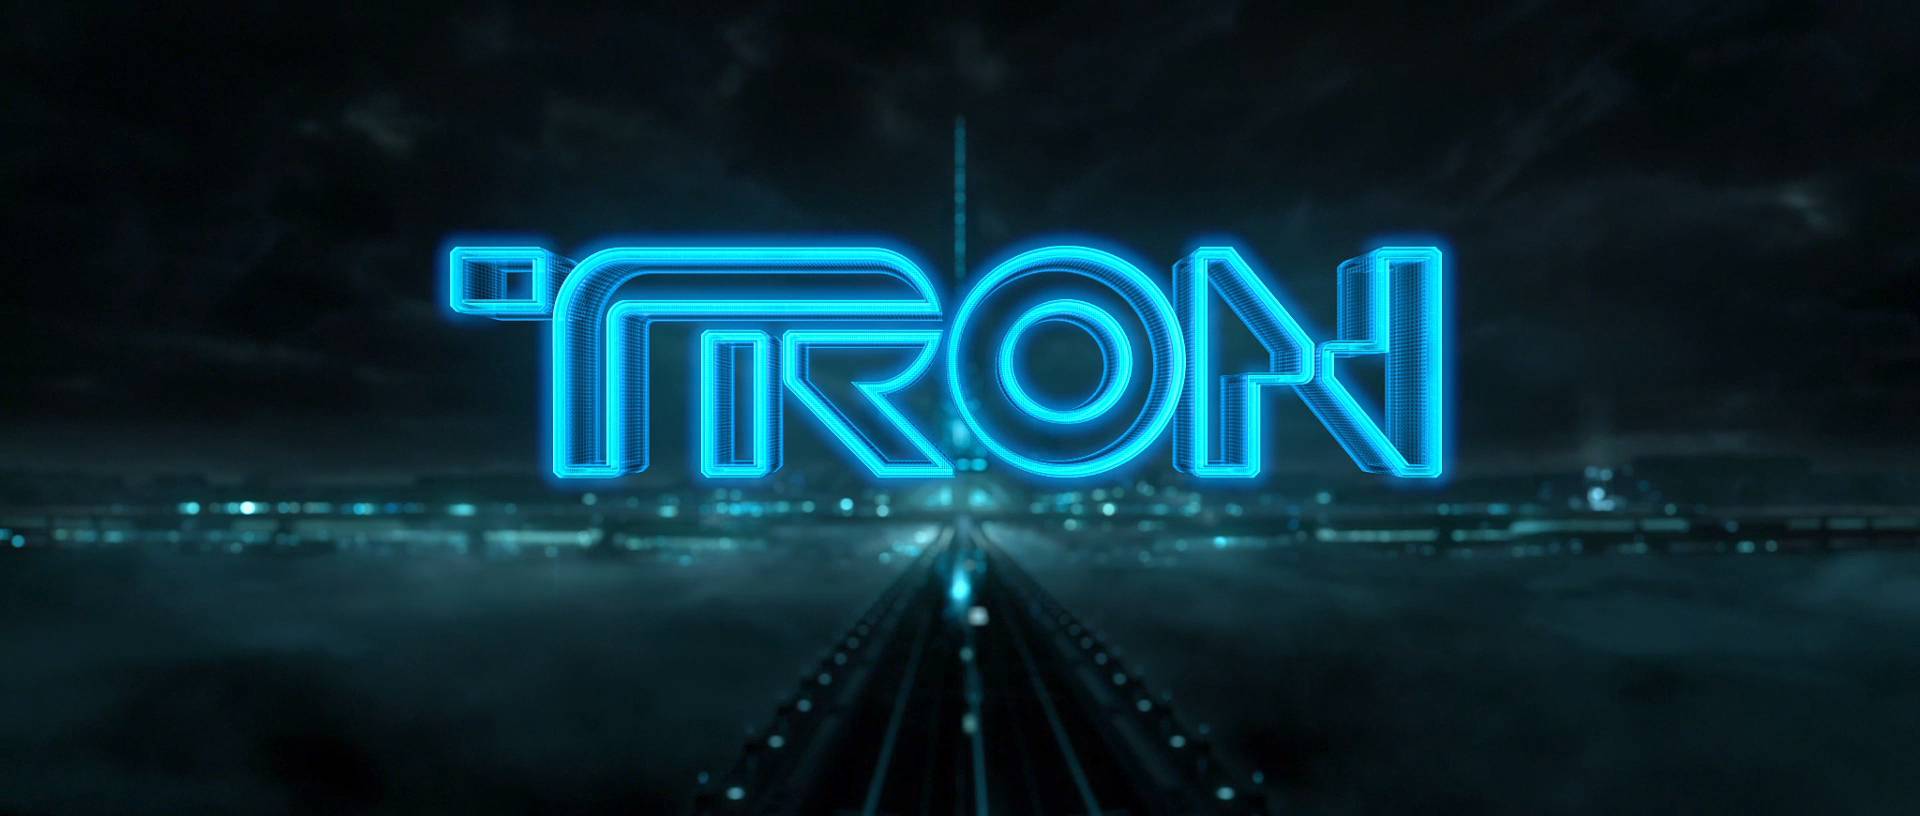 tron wallpapers legacy